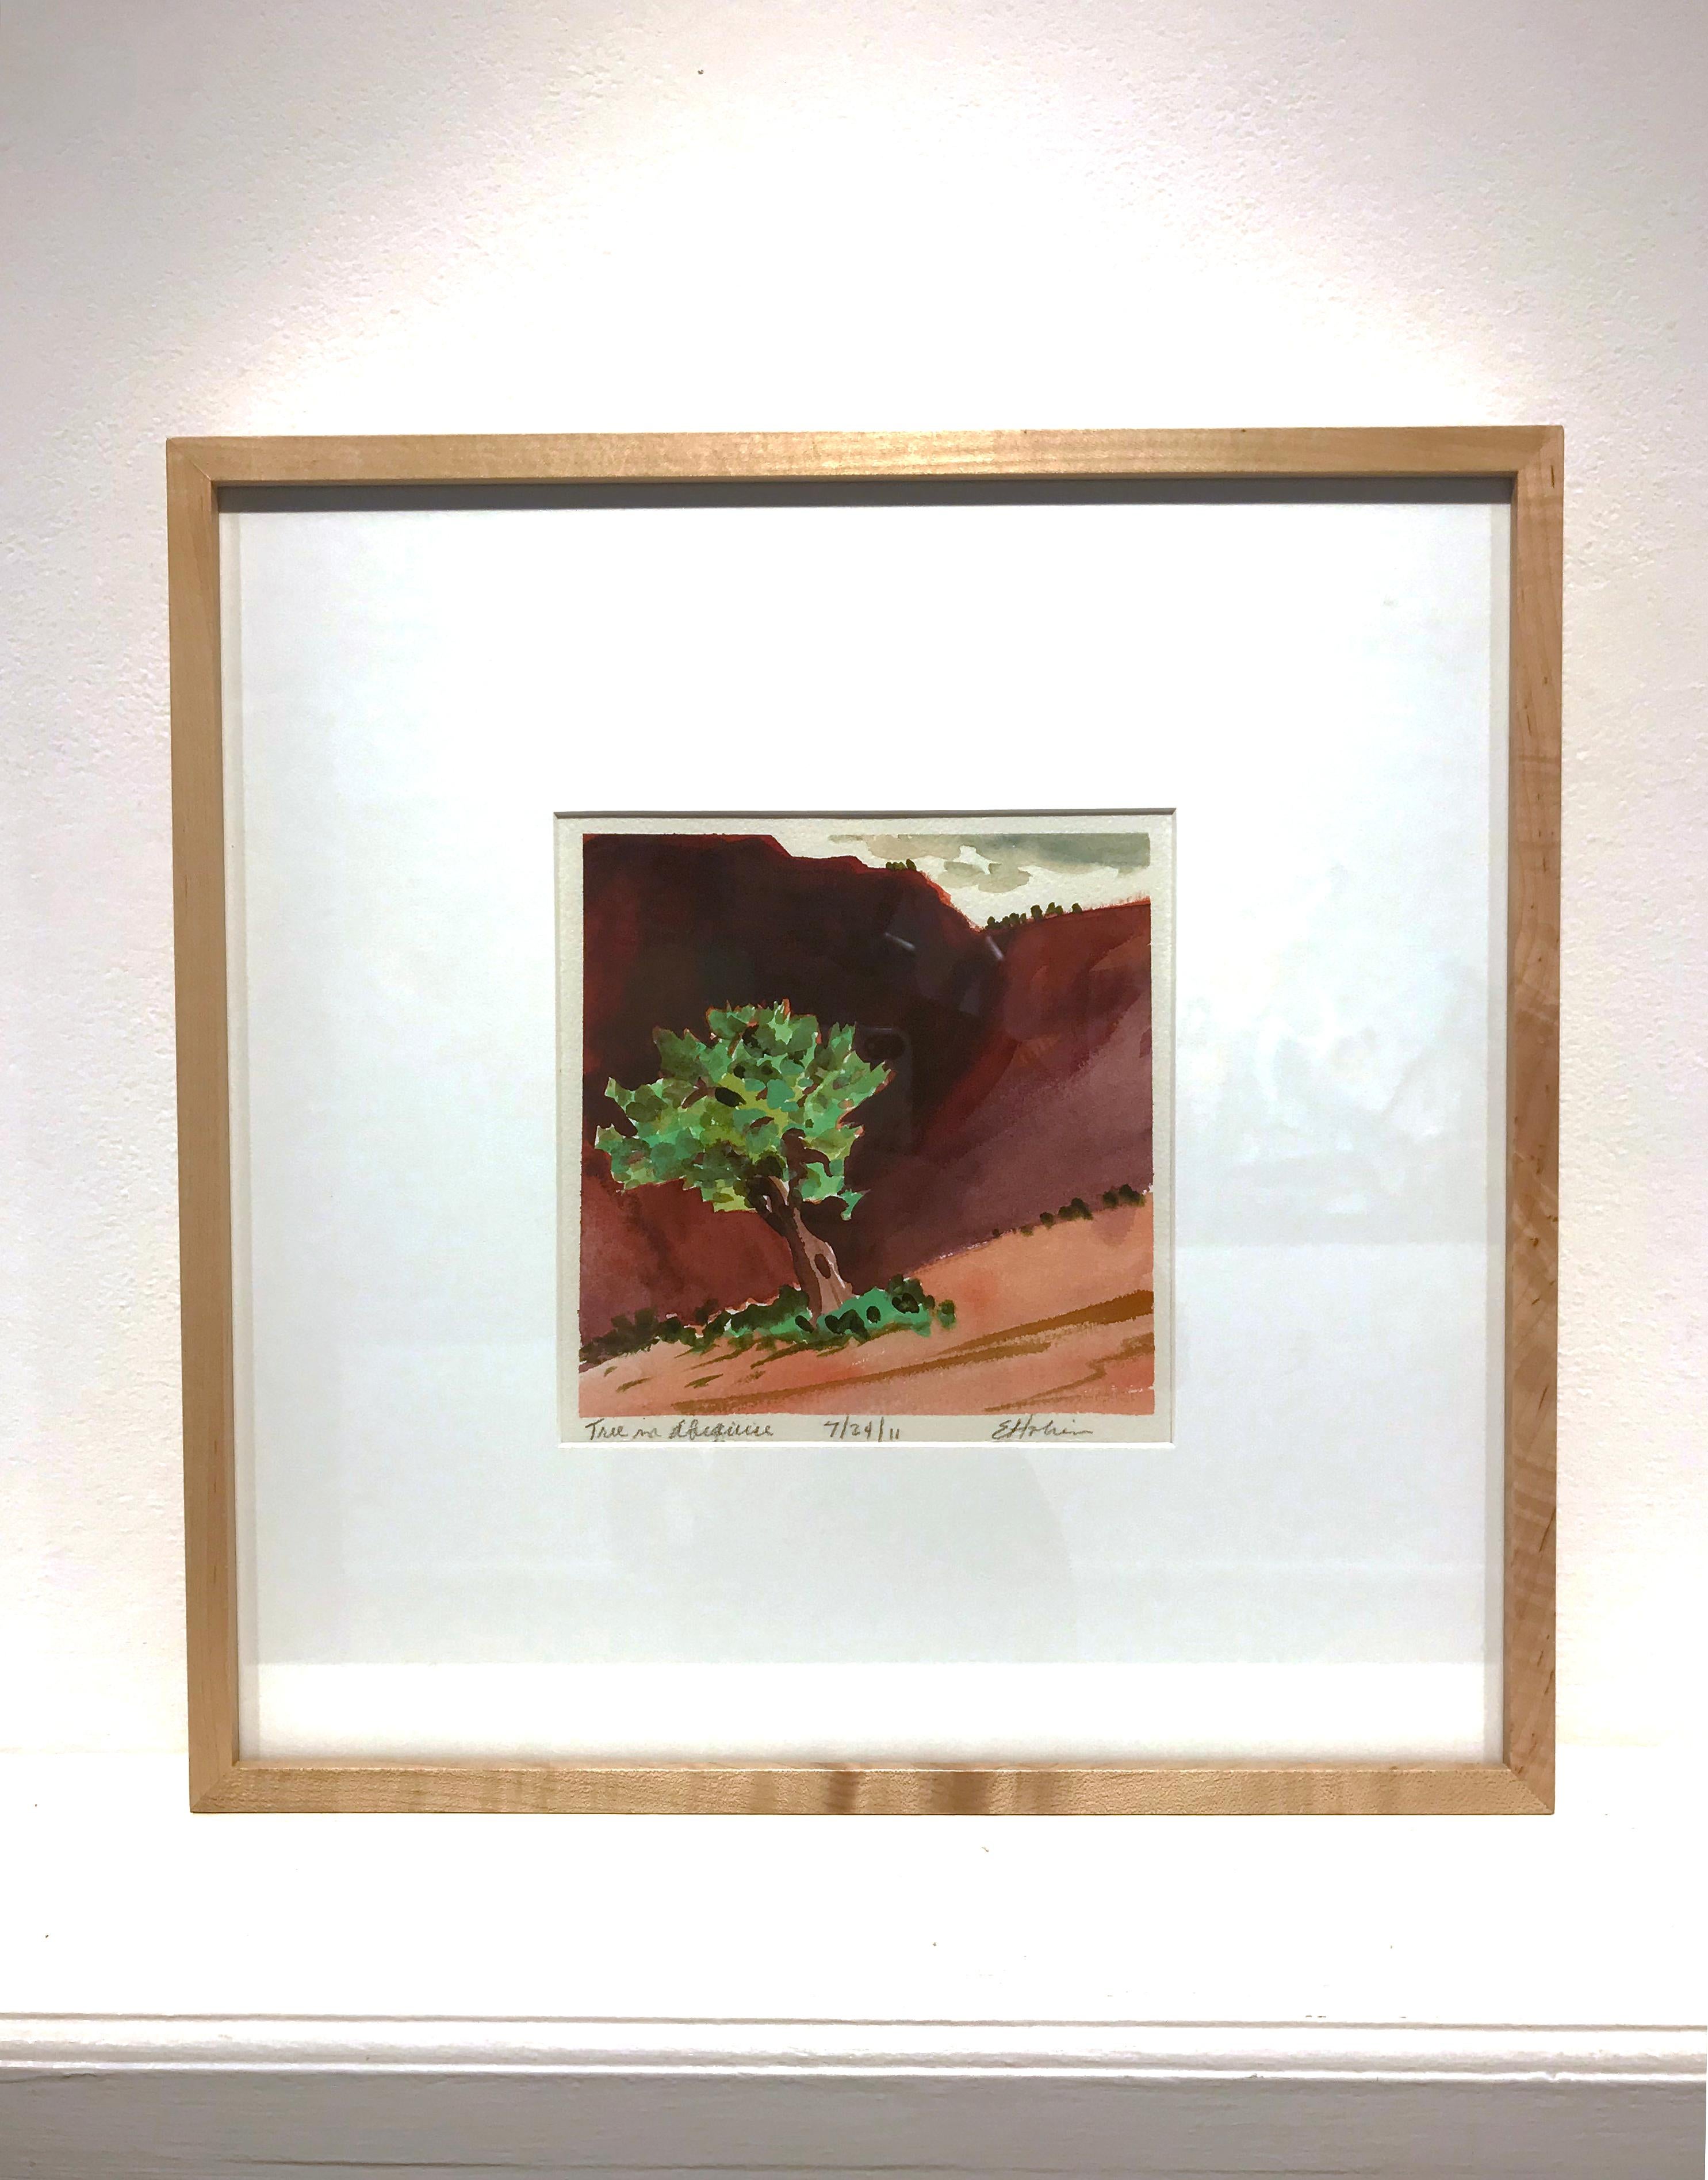 Tree in Abiquiu - Painting by Elaine Holien